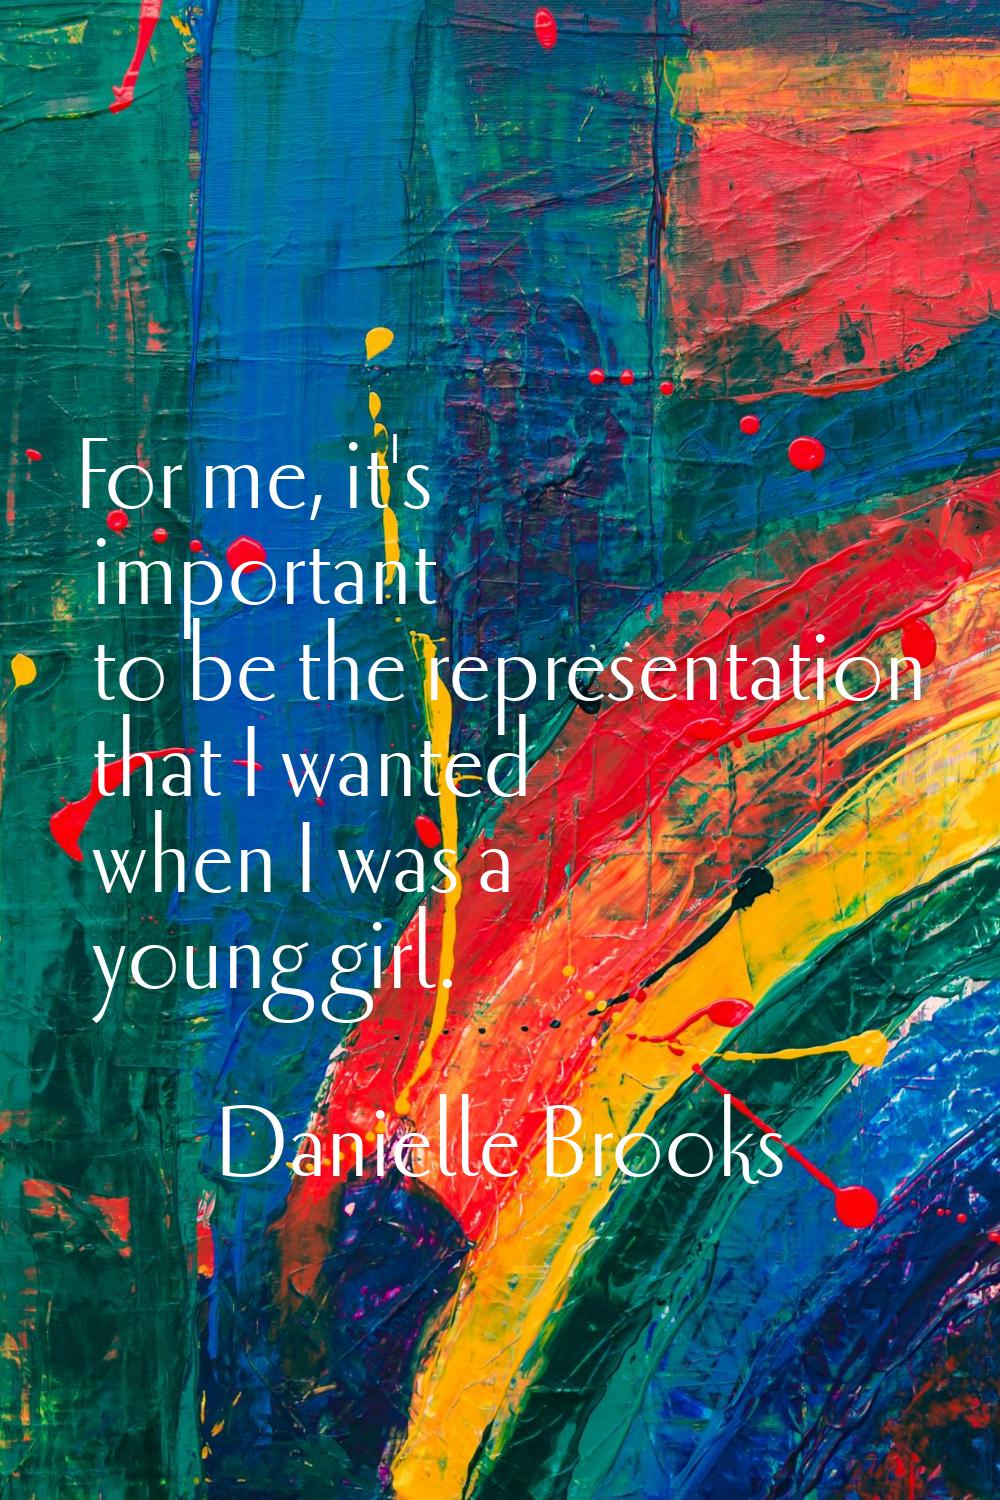 For me, it's important to be the representation that I wanted when I was a young girl.